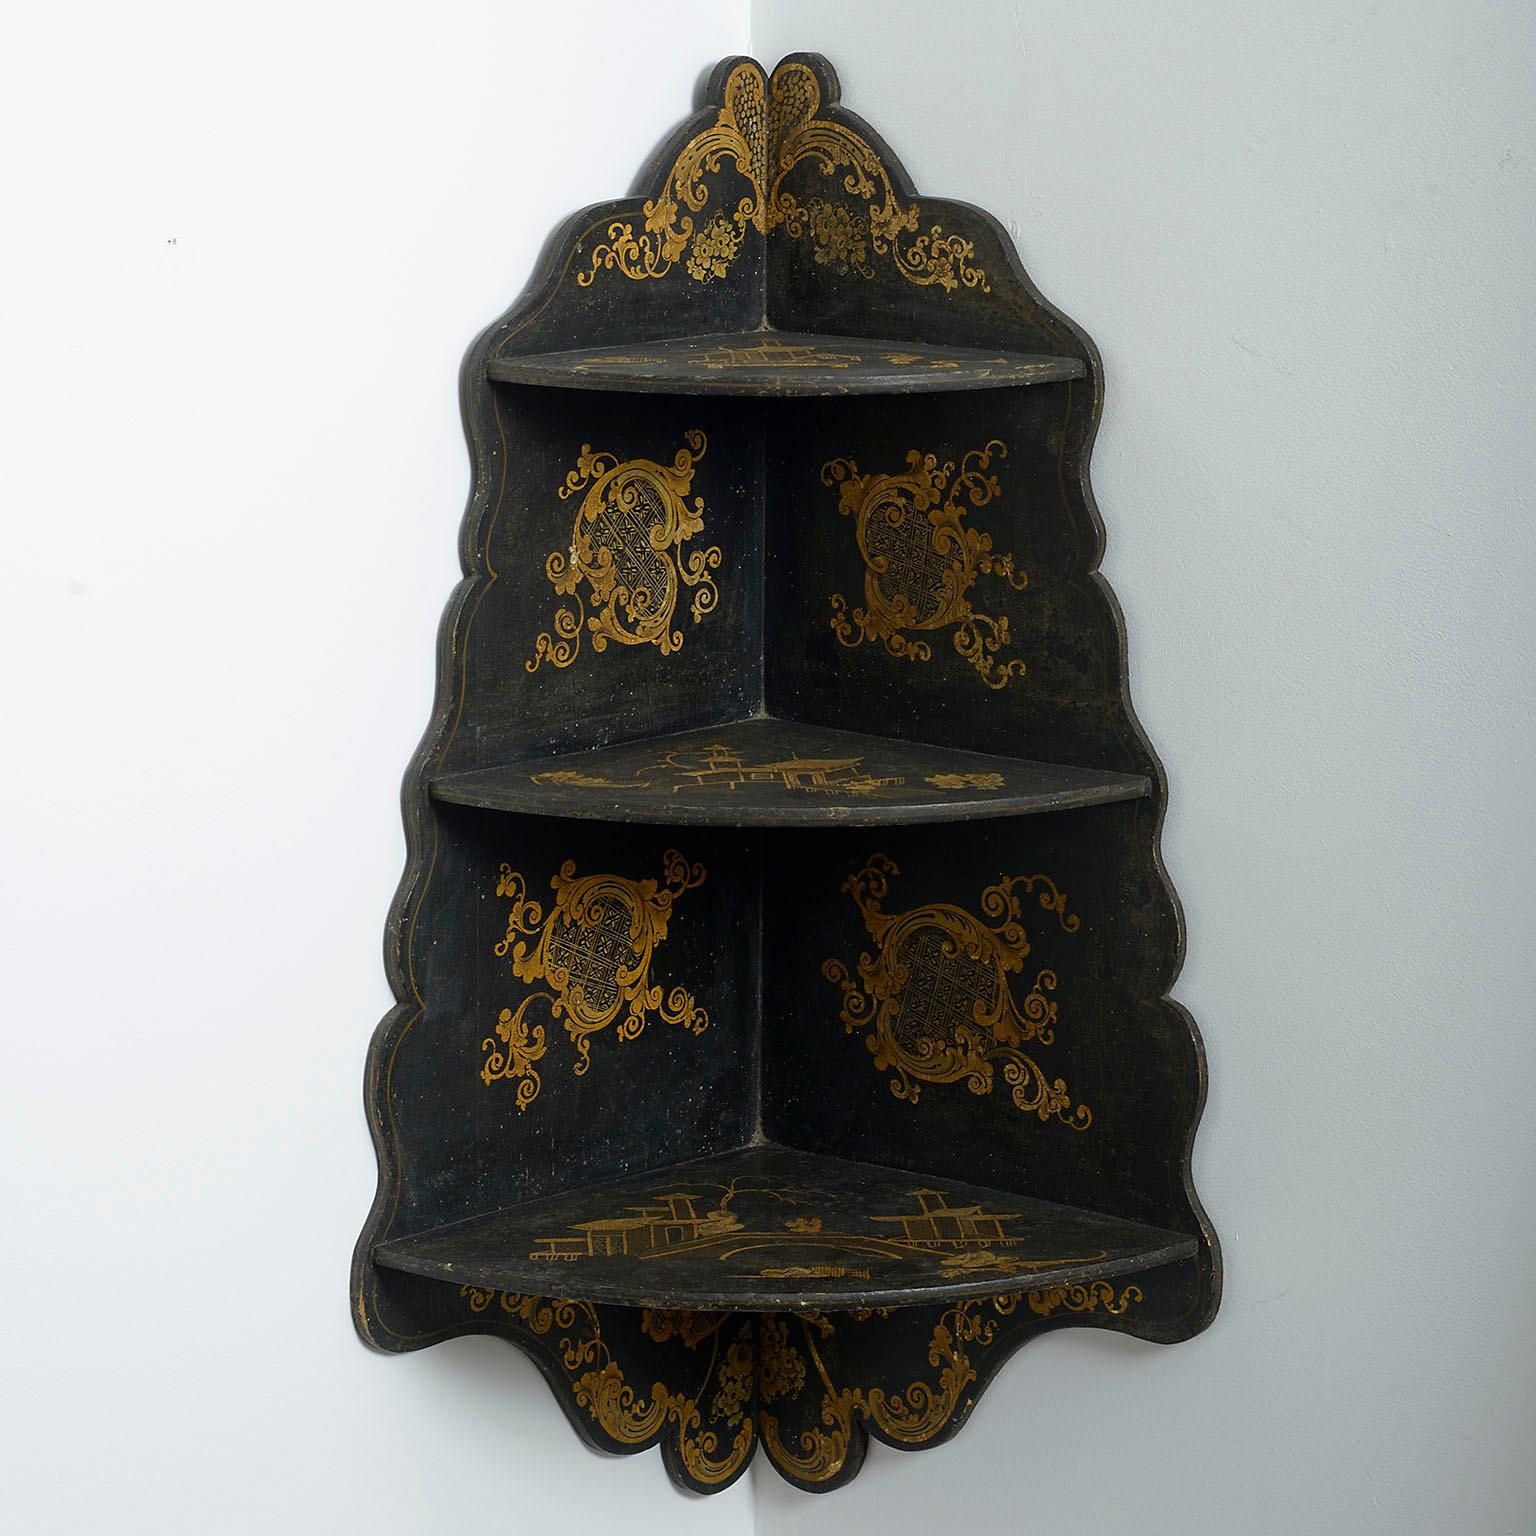 A pair of mid-nineteenth century black japanned hanging shelves, the fret cut frames each with three shaped shelves with gilt decoration throughout.

Circa 1860 England

Dimensions: 10.5 W x 17 D x 29 H inches
26.5 W x 44 D x 73 H cm